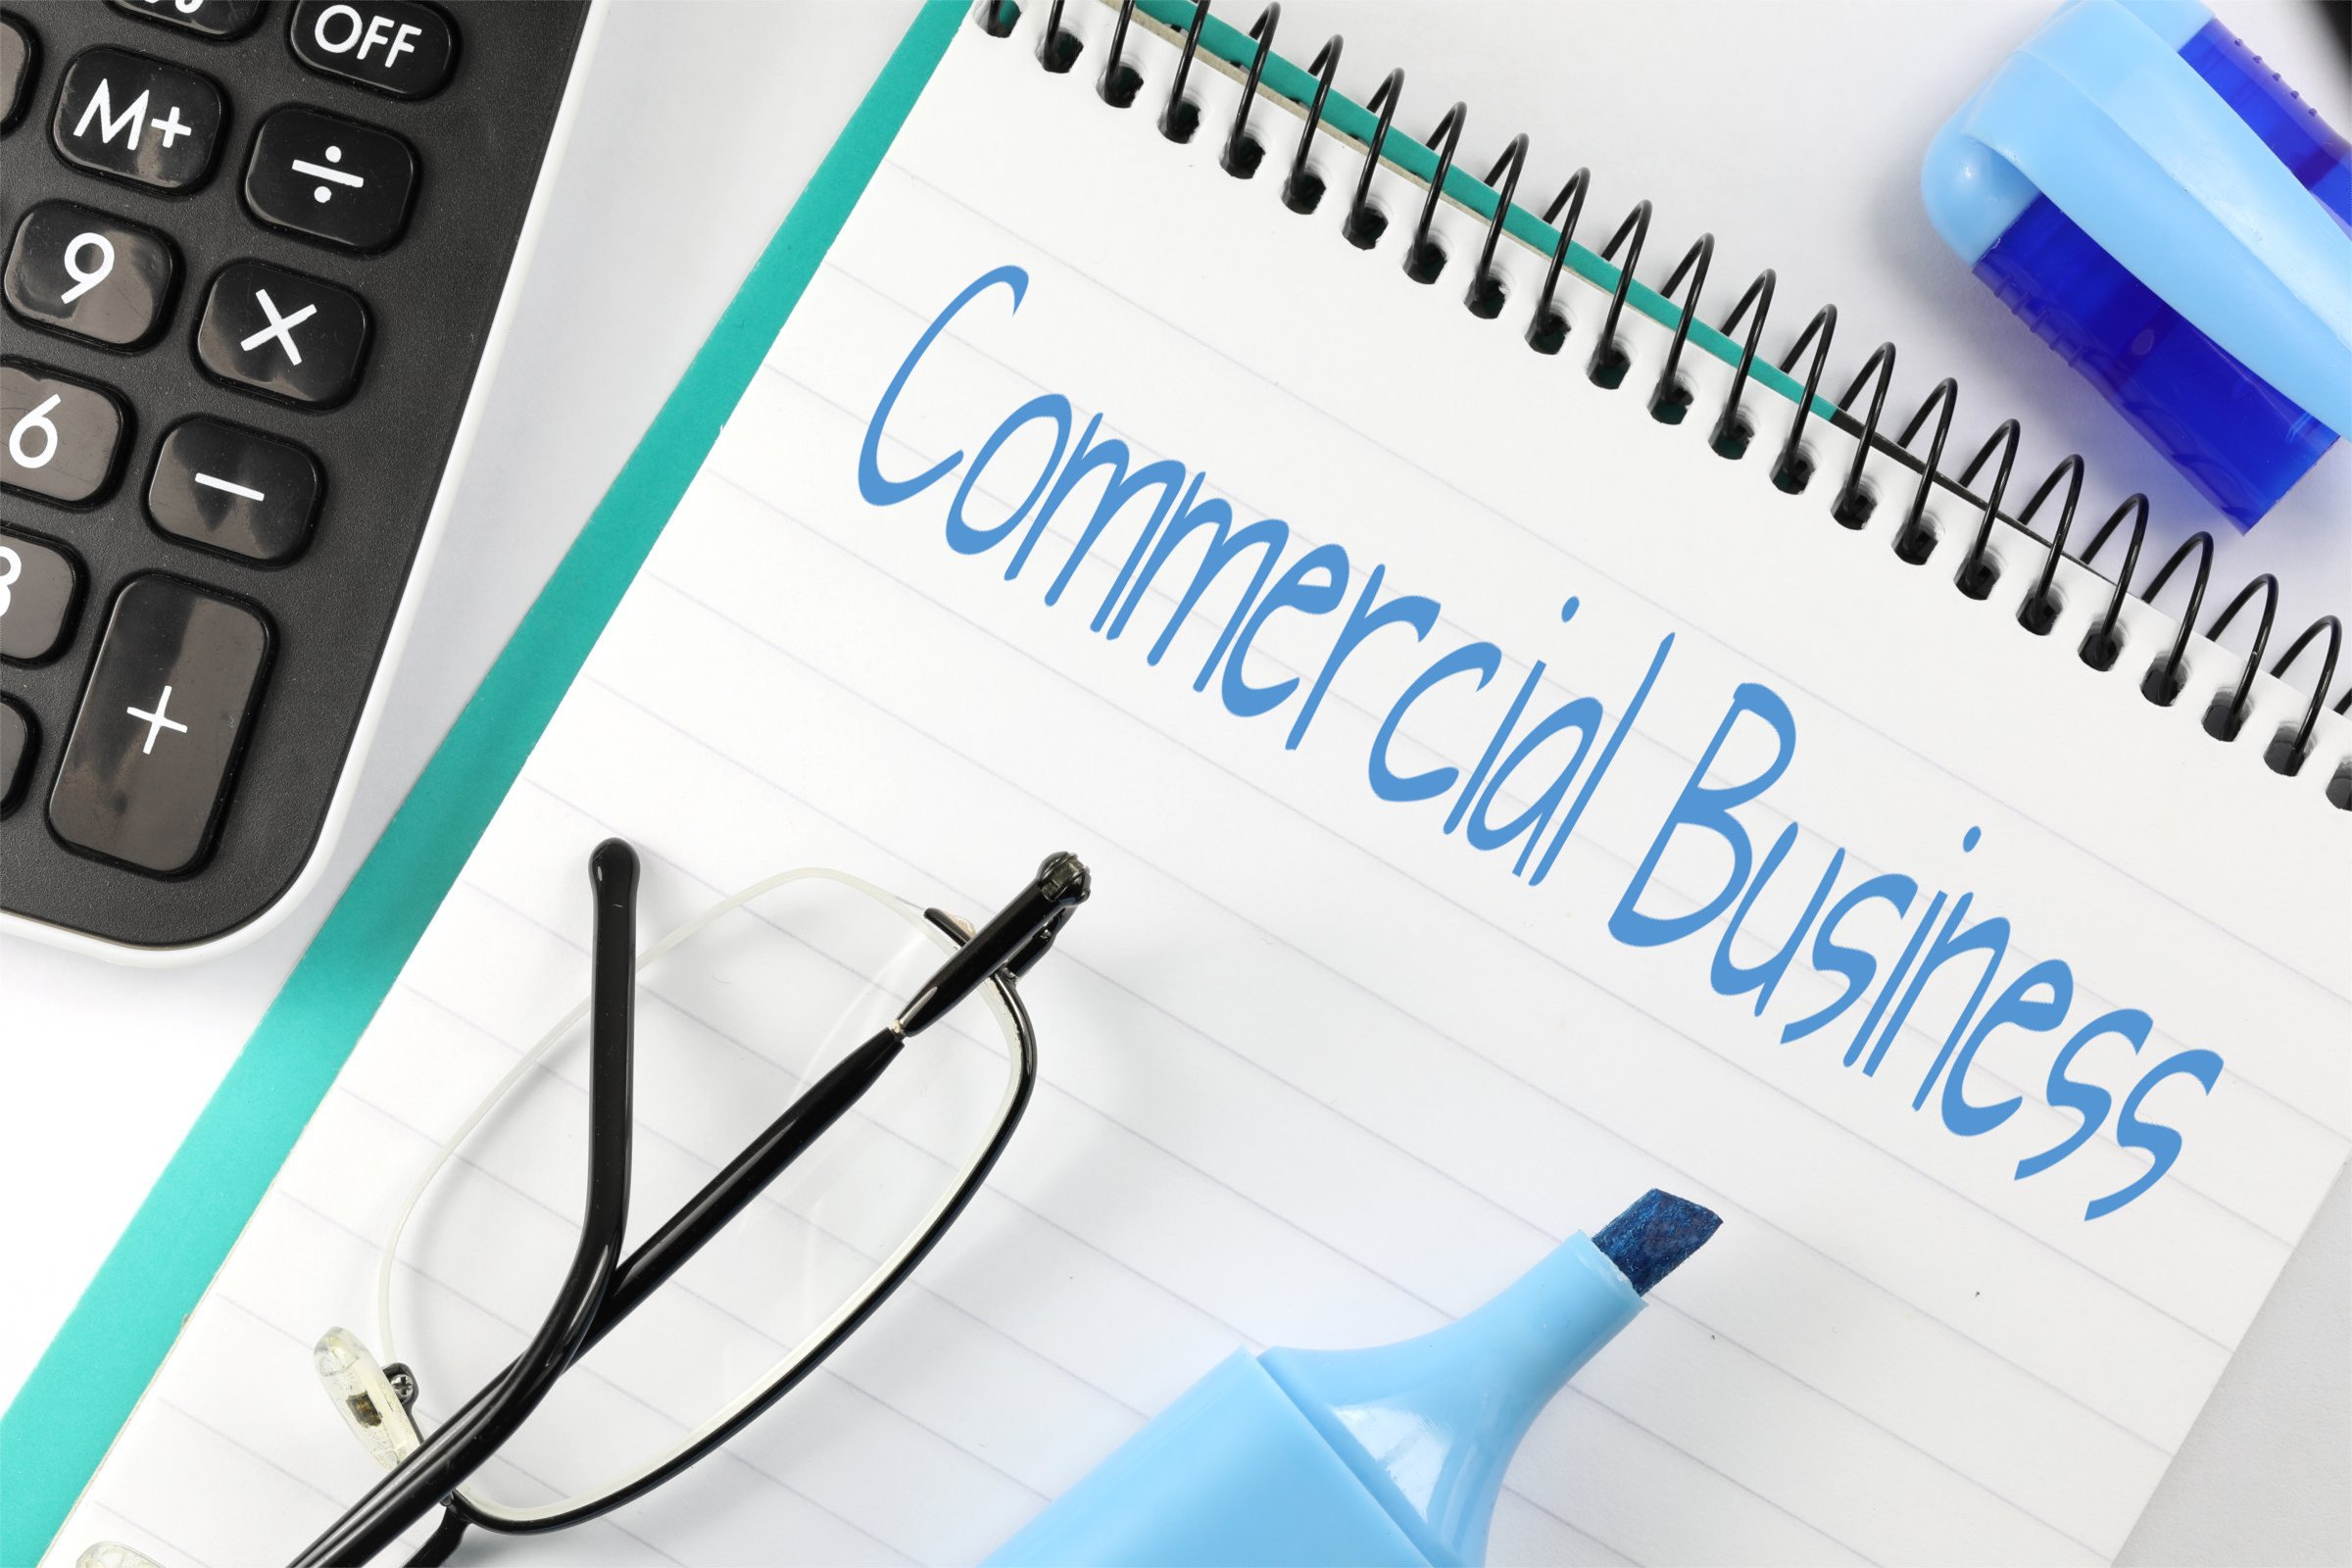 commercial business